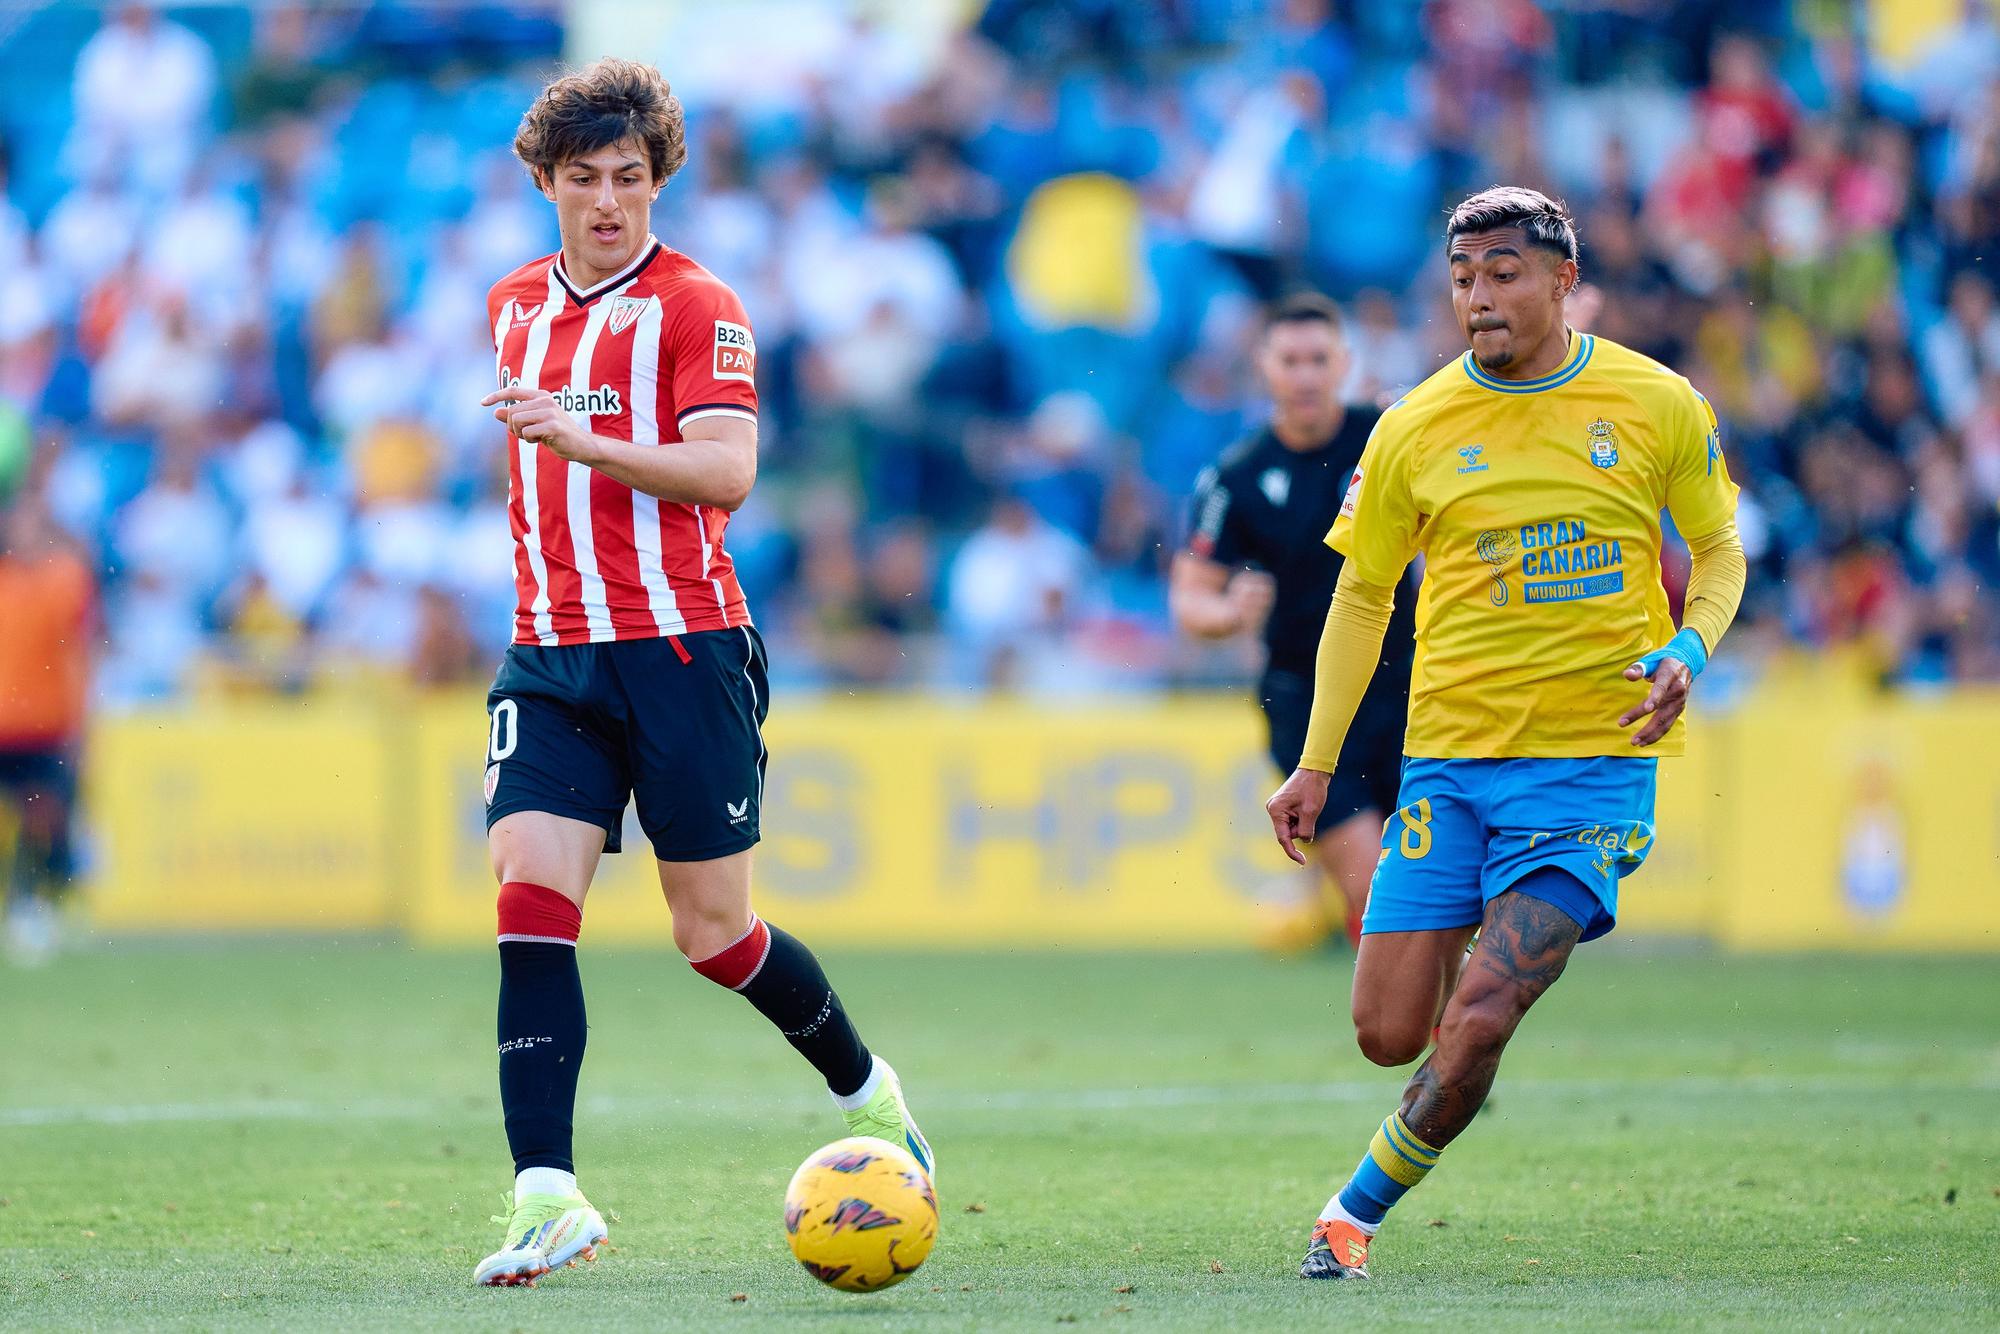 Unai Gomez of Athletic Club competes for the ball with Julian Araujo of UD Las Palmas during the Spanish league, La Liga EA Sports, football match played between UD Las Palmas and Athletic Club at Estadio Gran Canaria on March 10, 2024, in Las Palmas de Gran Canaria, Spain. AFP7 10/03/2024 ONLY FOR USE IN SPAIN / Gabriel Jimenez / AFP7 / Europa Press;2024;SOCCER;Sport;ZSOCCER;ZSPORT;UD Las Palmas v Athletic Club - La Liga EA Sports;